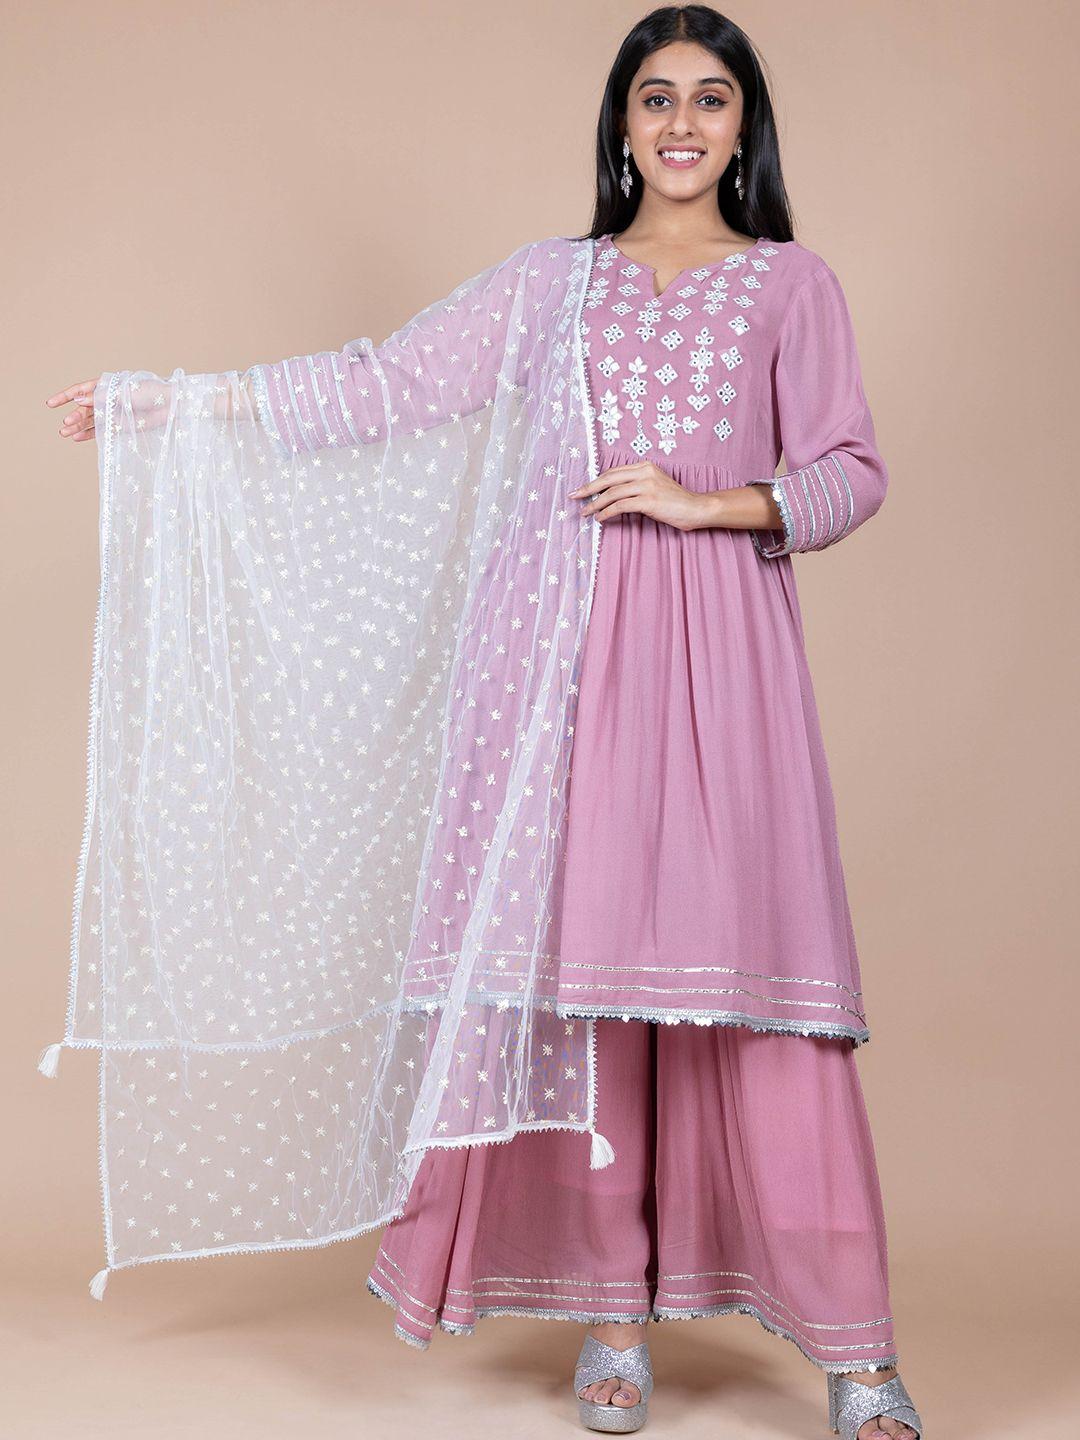 here&now white ethnic motifs embroidered dupatta